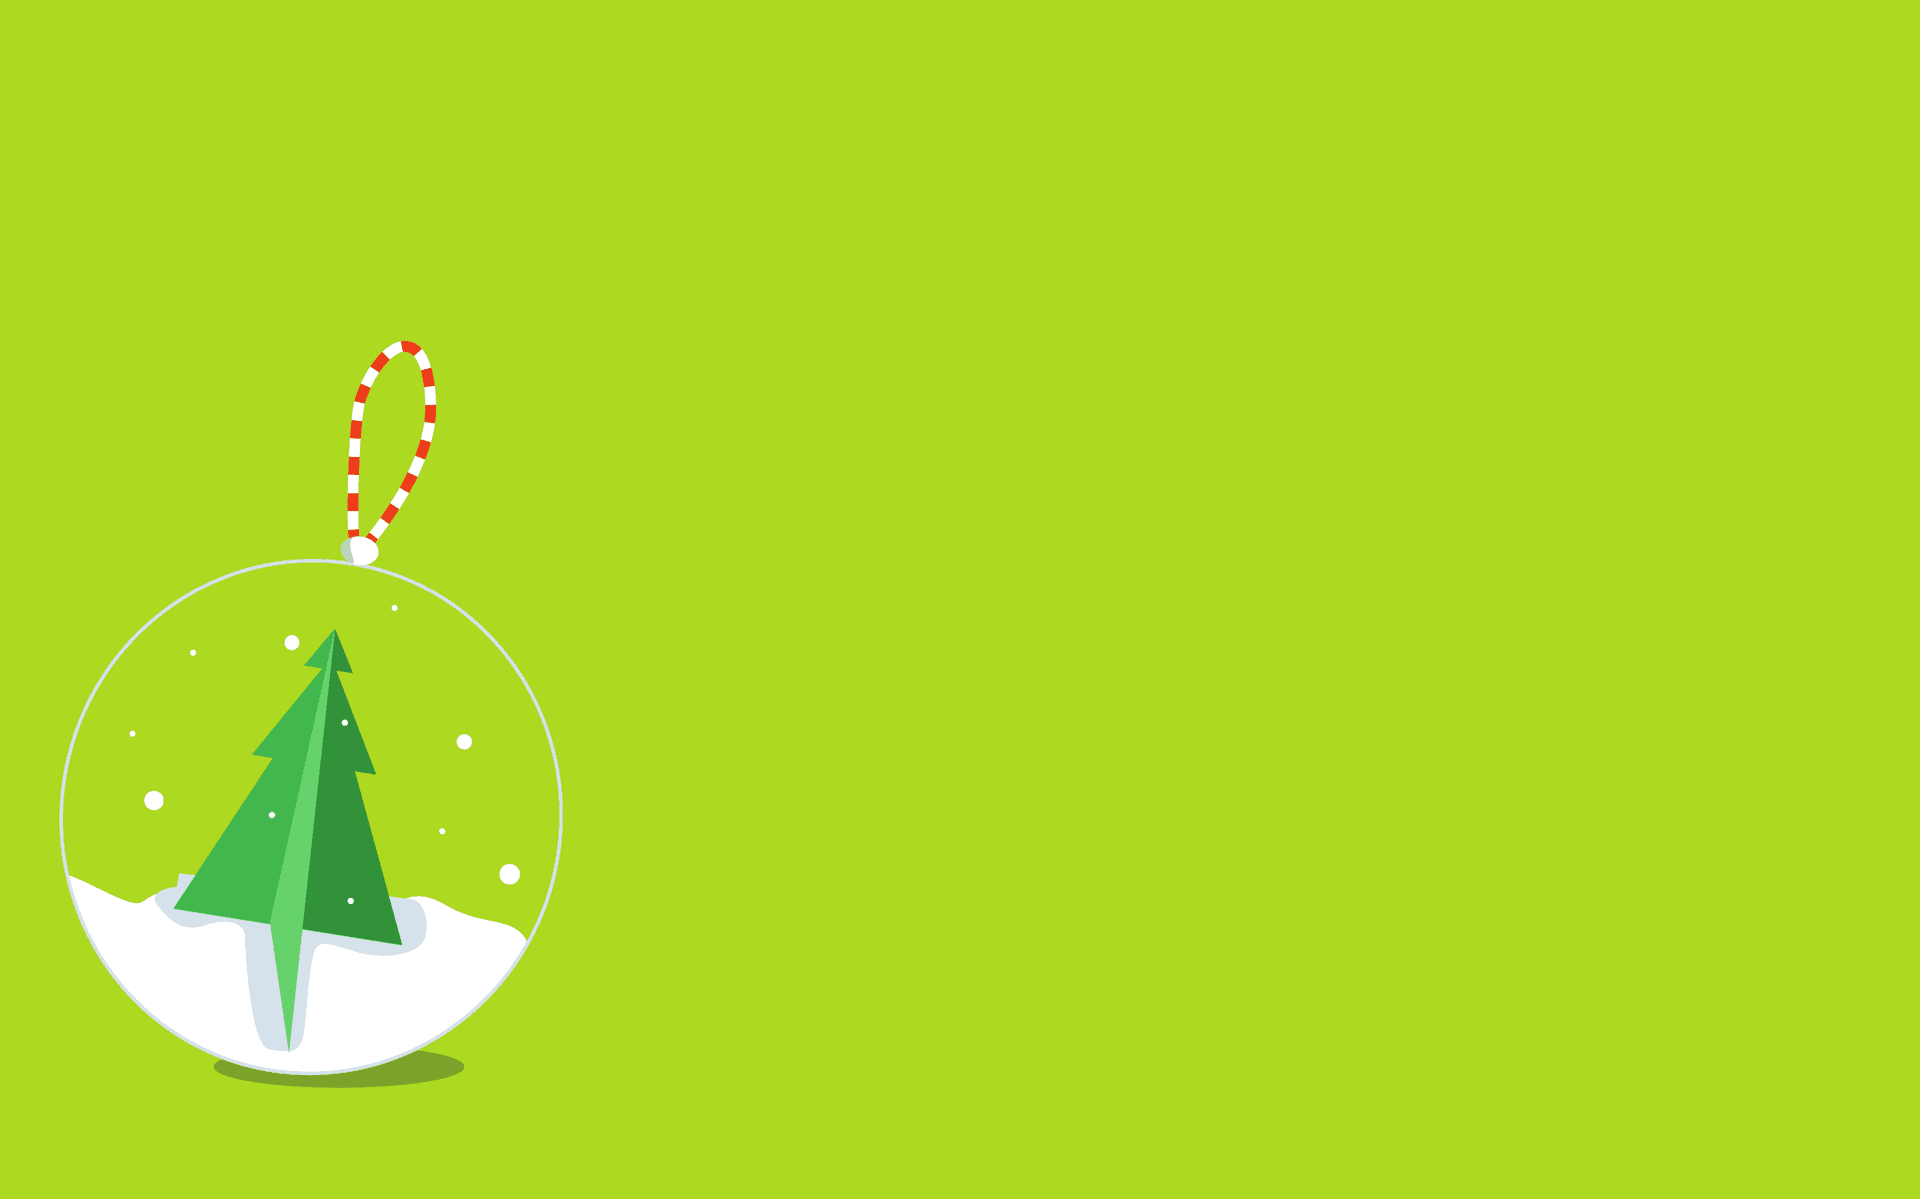 Captivating Simple Christmas background